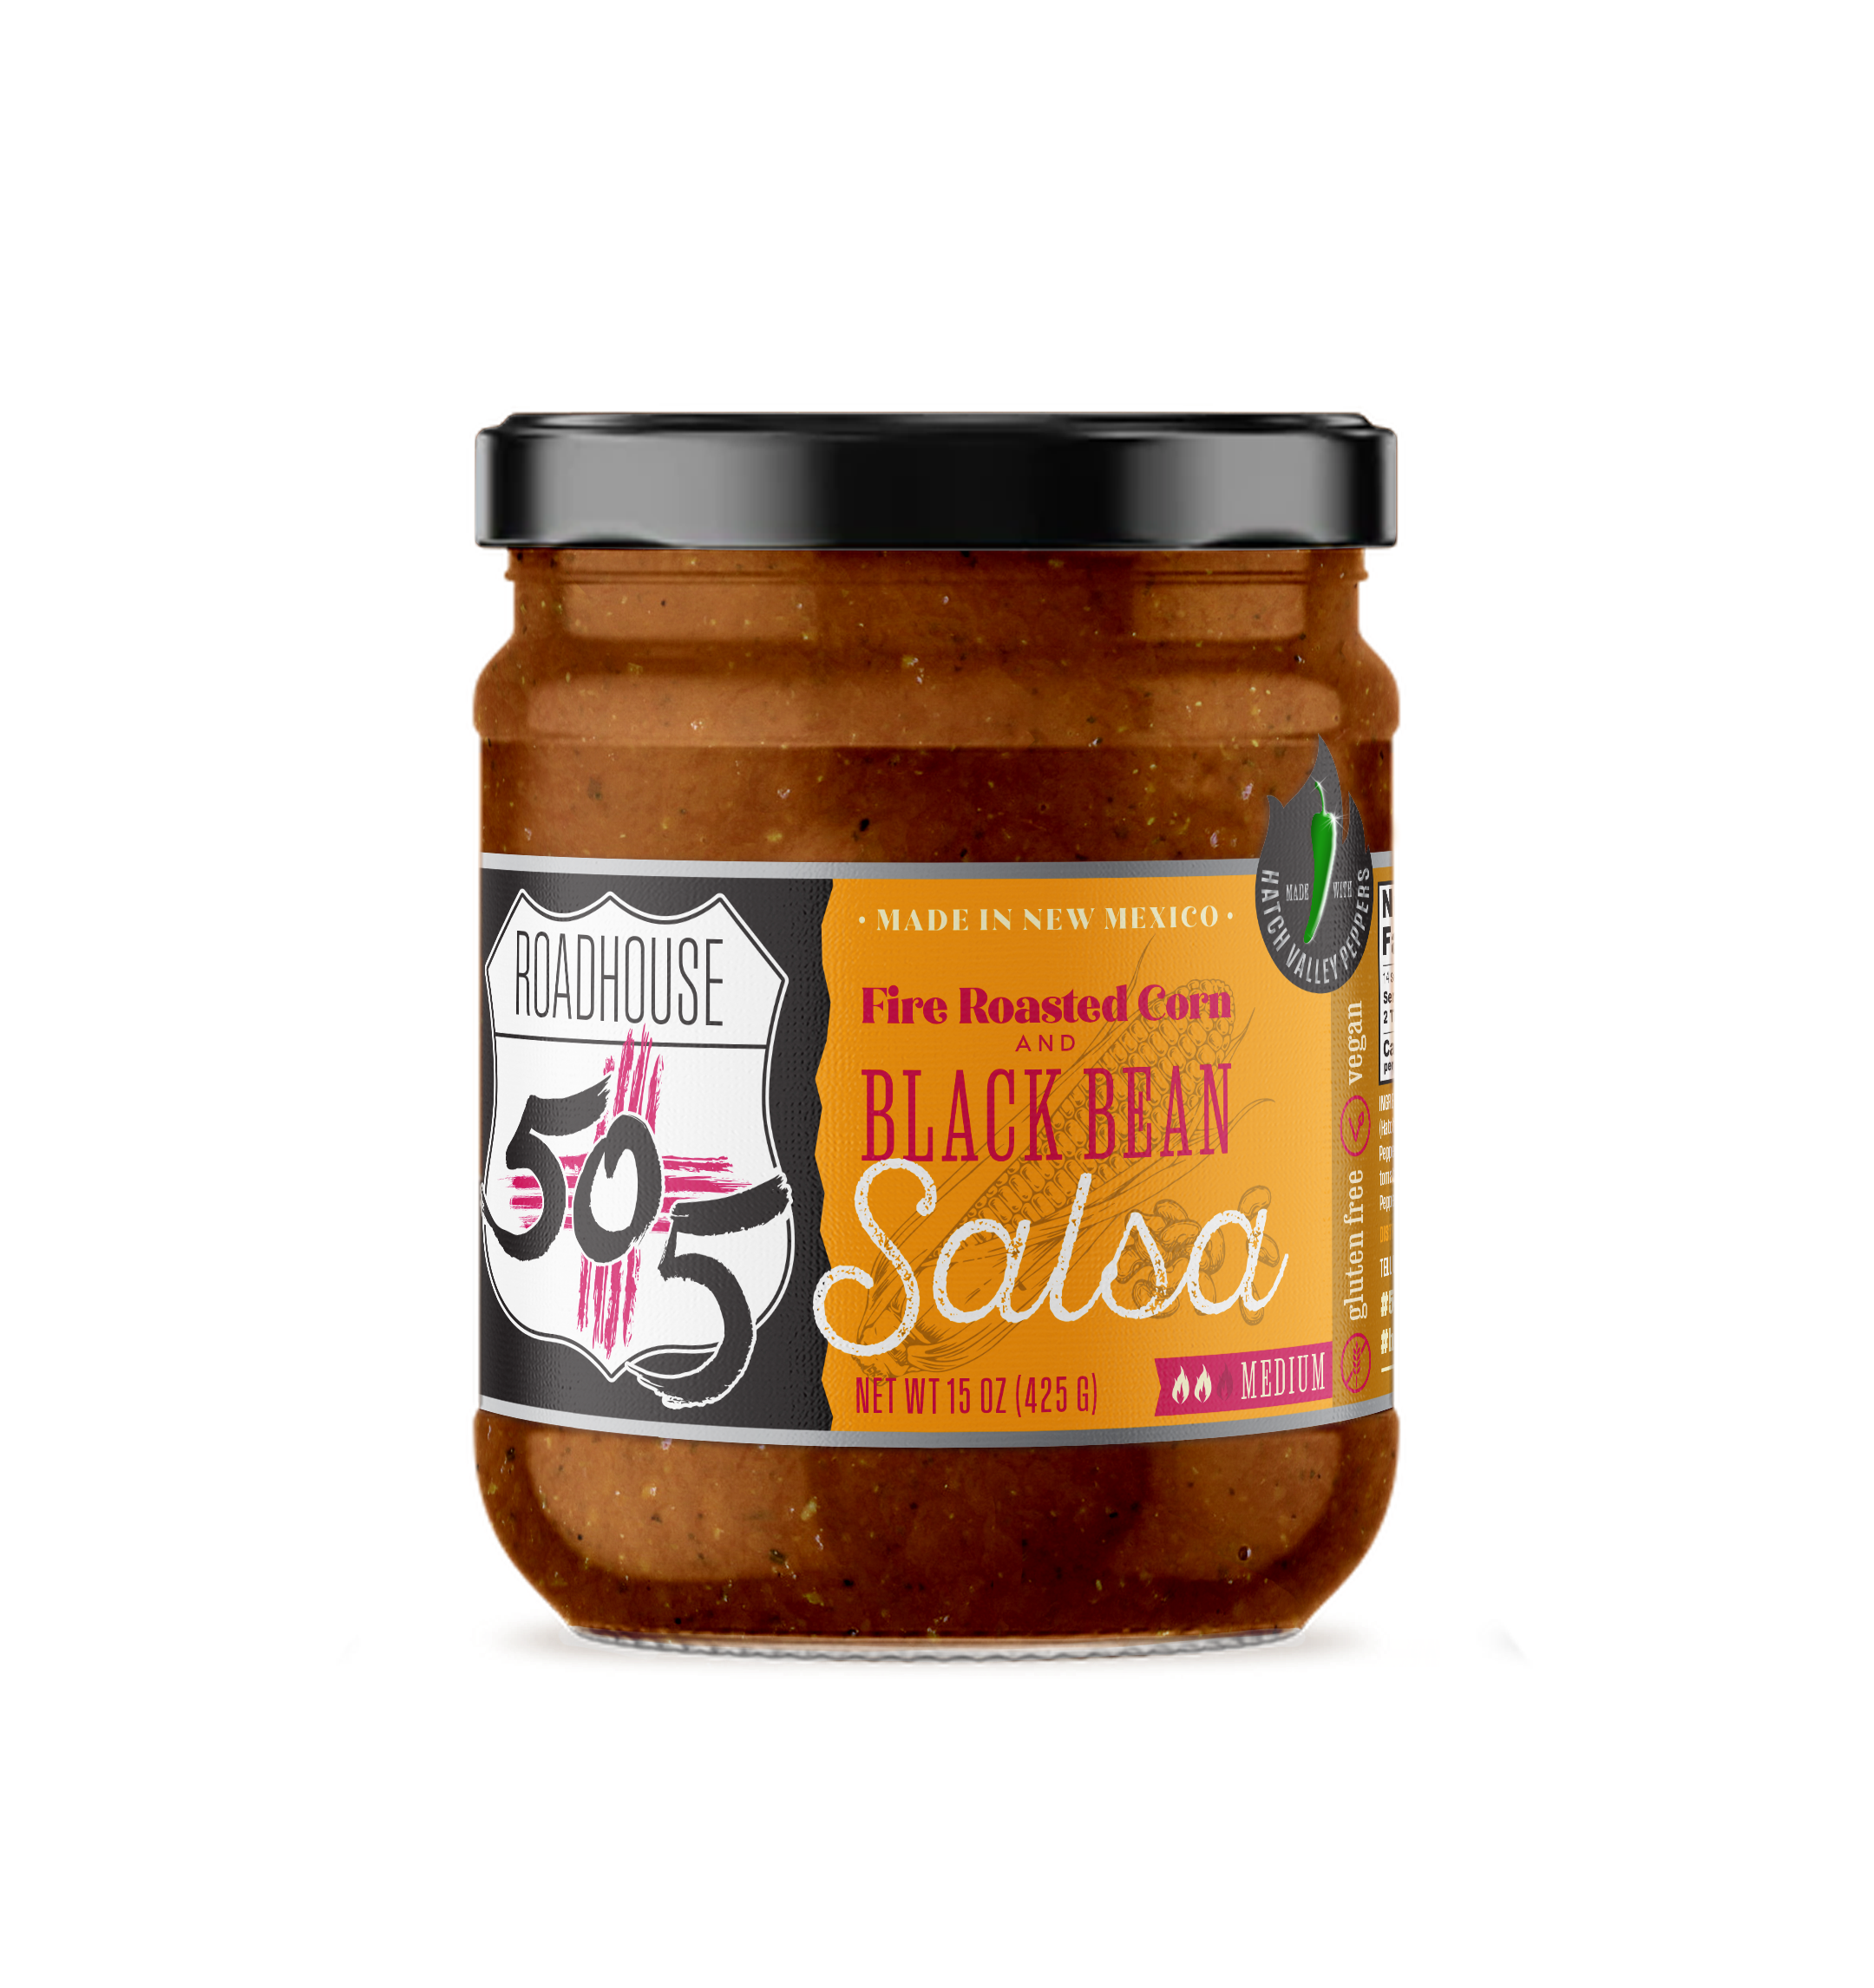 505 Southwestern Introduces New Line of Roadhouse Salsas 165